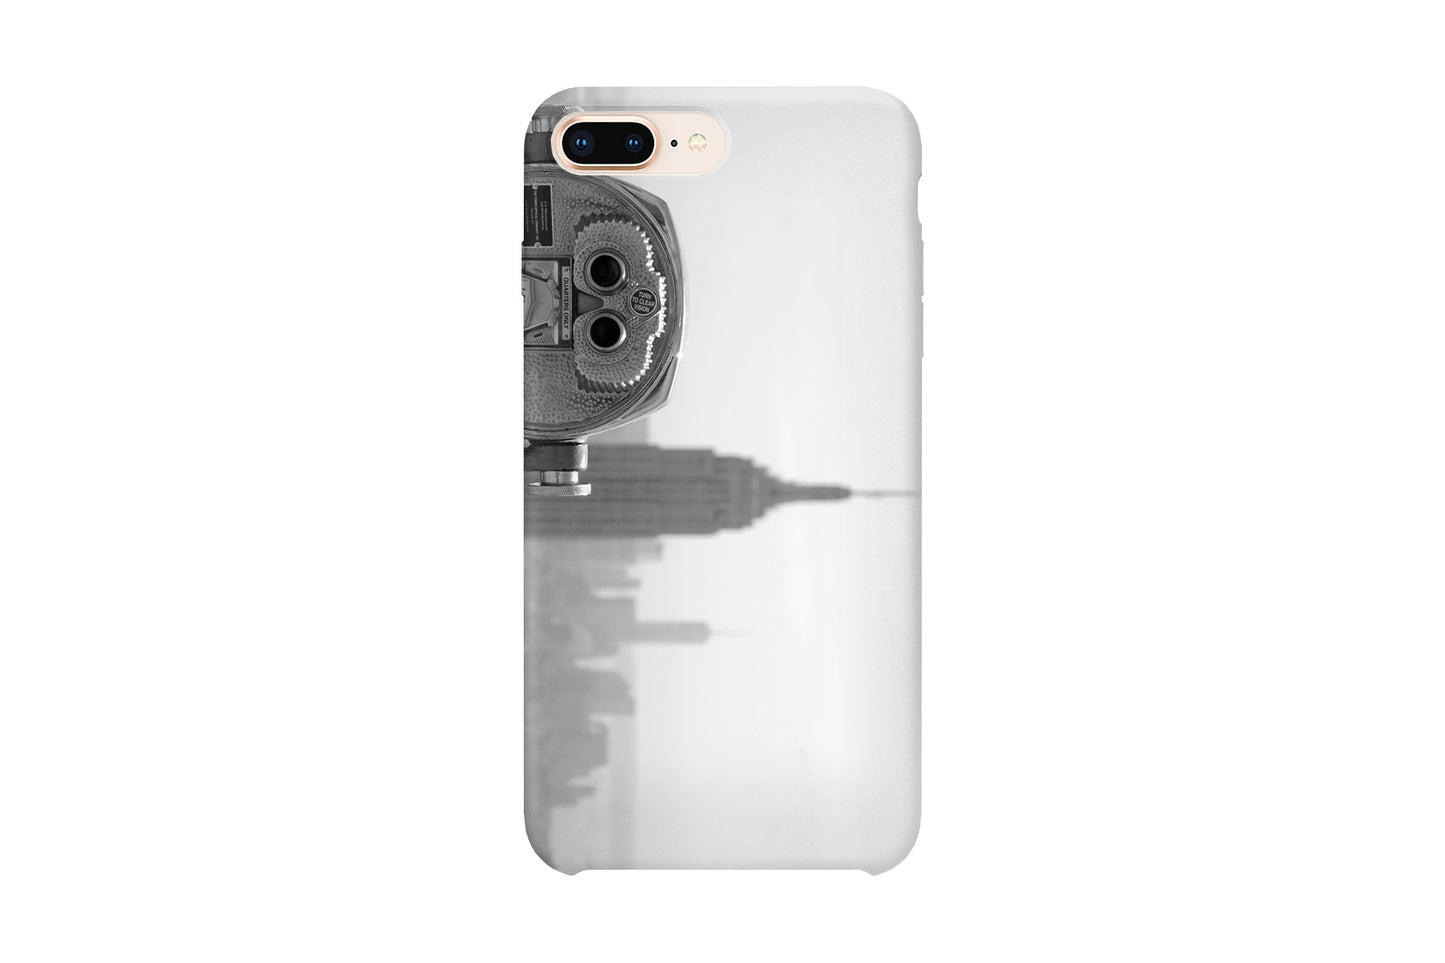 Top of the Rock iPhone case by Mike Lindwasser